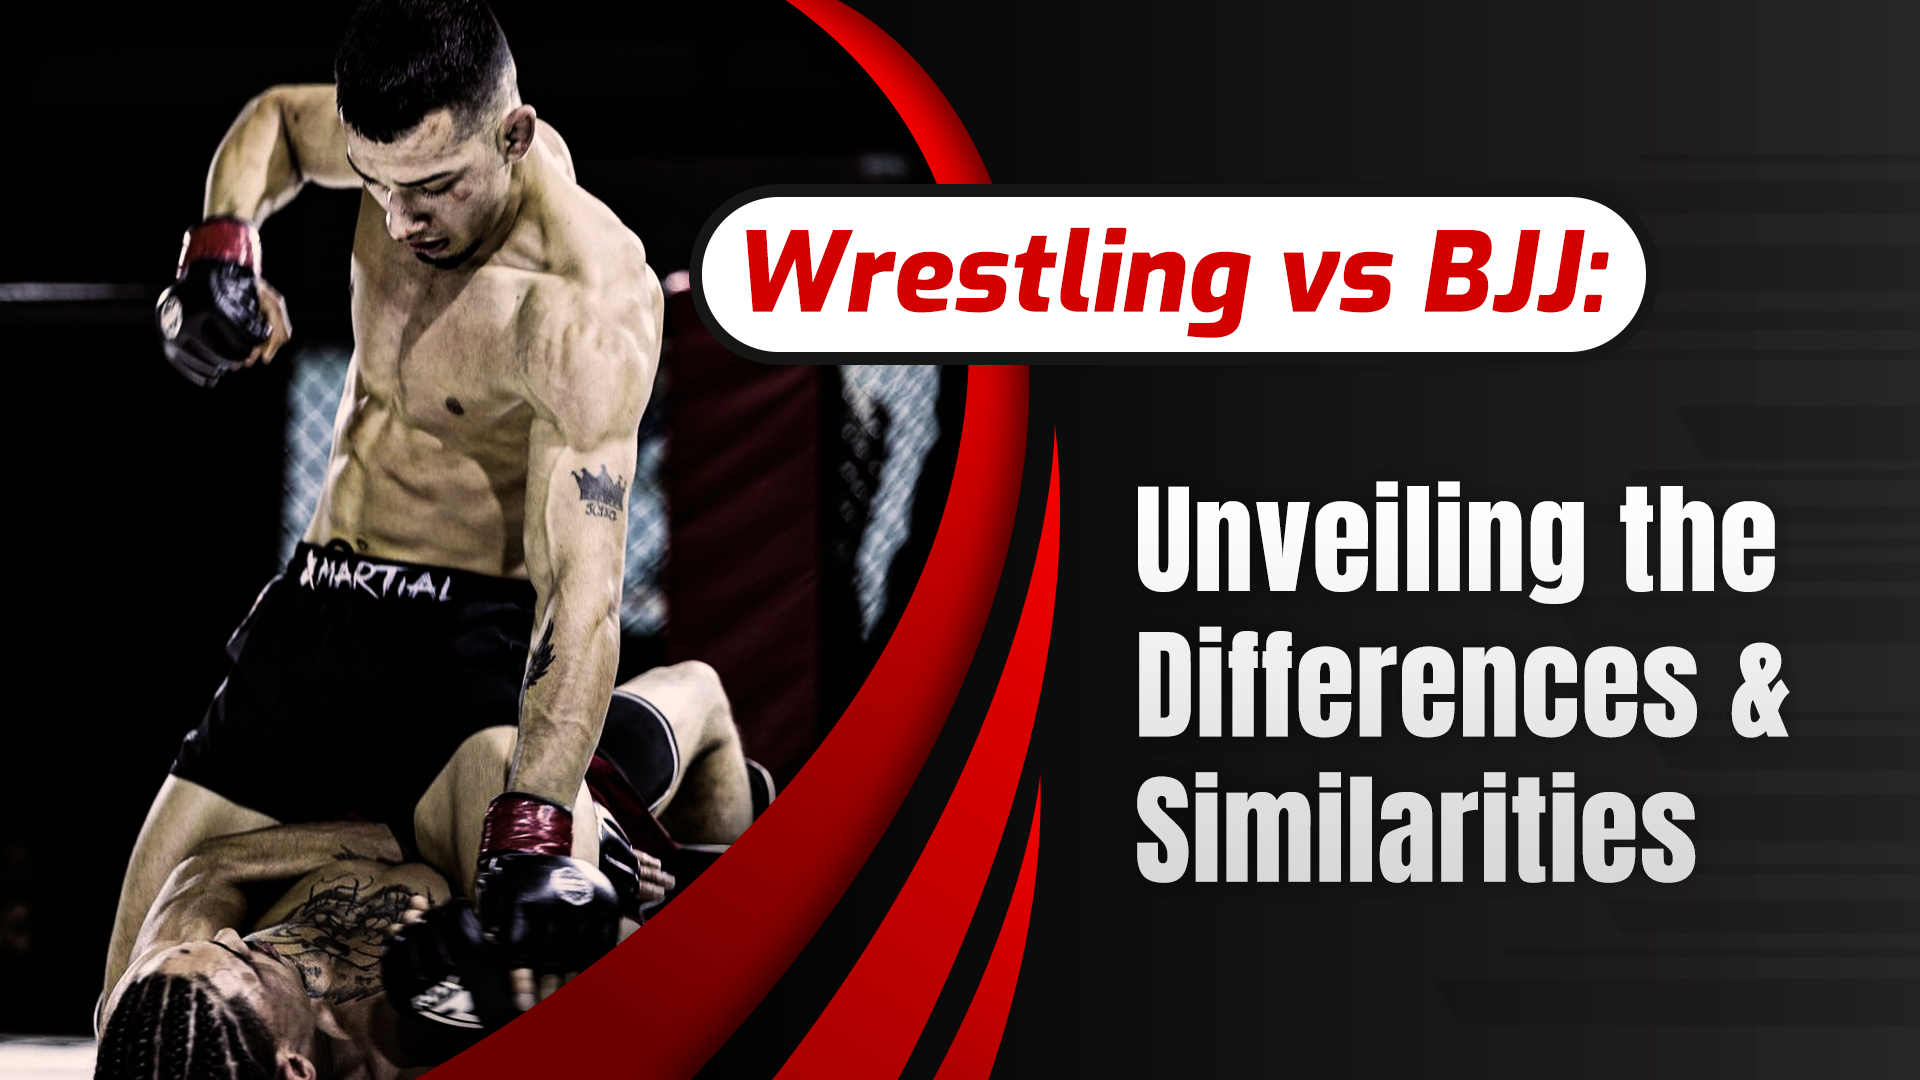 Wrestling vs BJJ: Unveiling the Differences and Similarities